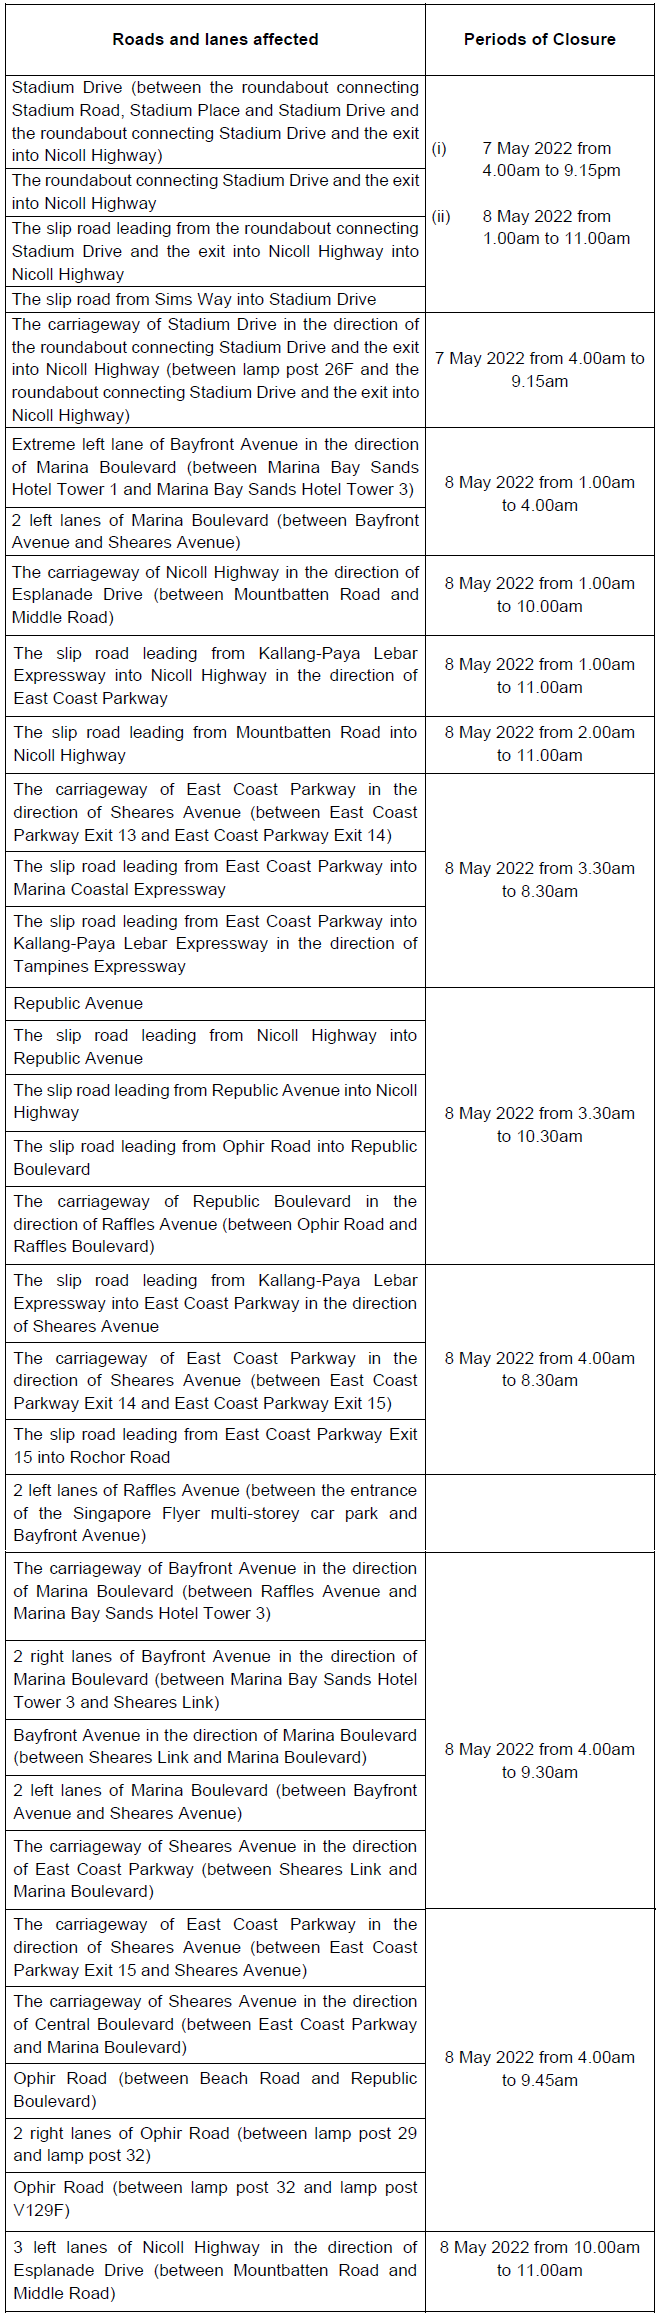 Road closures for the OCBC Cycle on May 7-8, 2022.